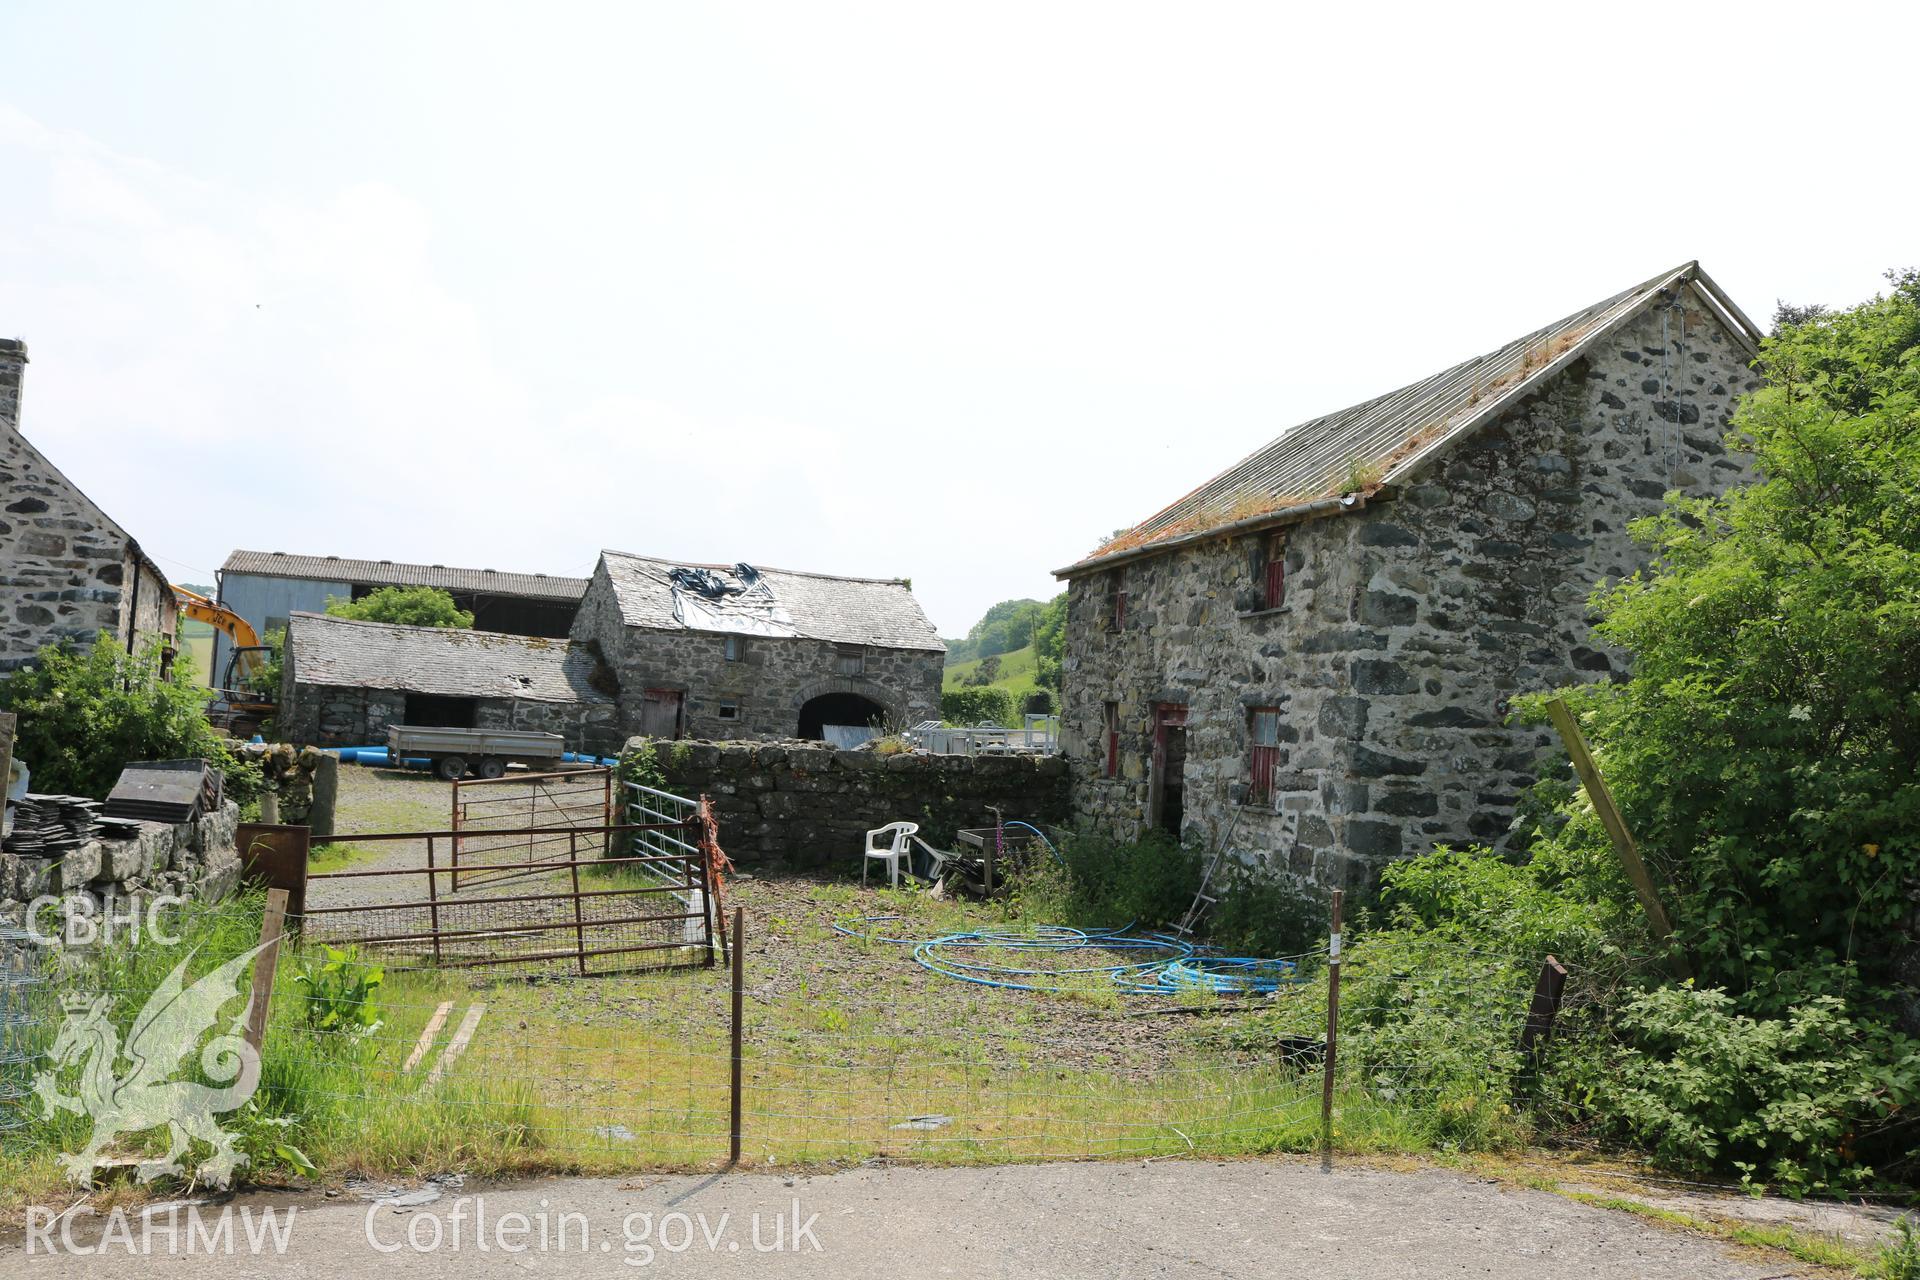 Photograph showing exterior view of cottage, at Maes yr Hendre, taken by Dr Marian Gwyn, 6th July 2016. (Original Reference no. 0293)